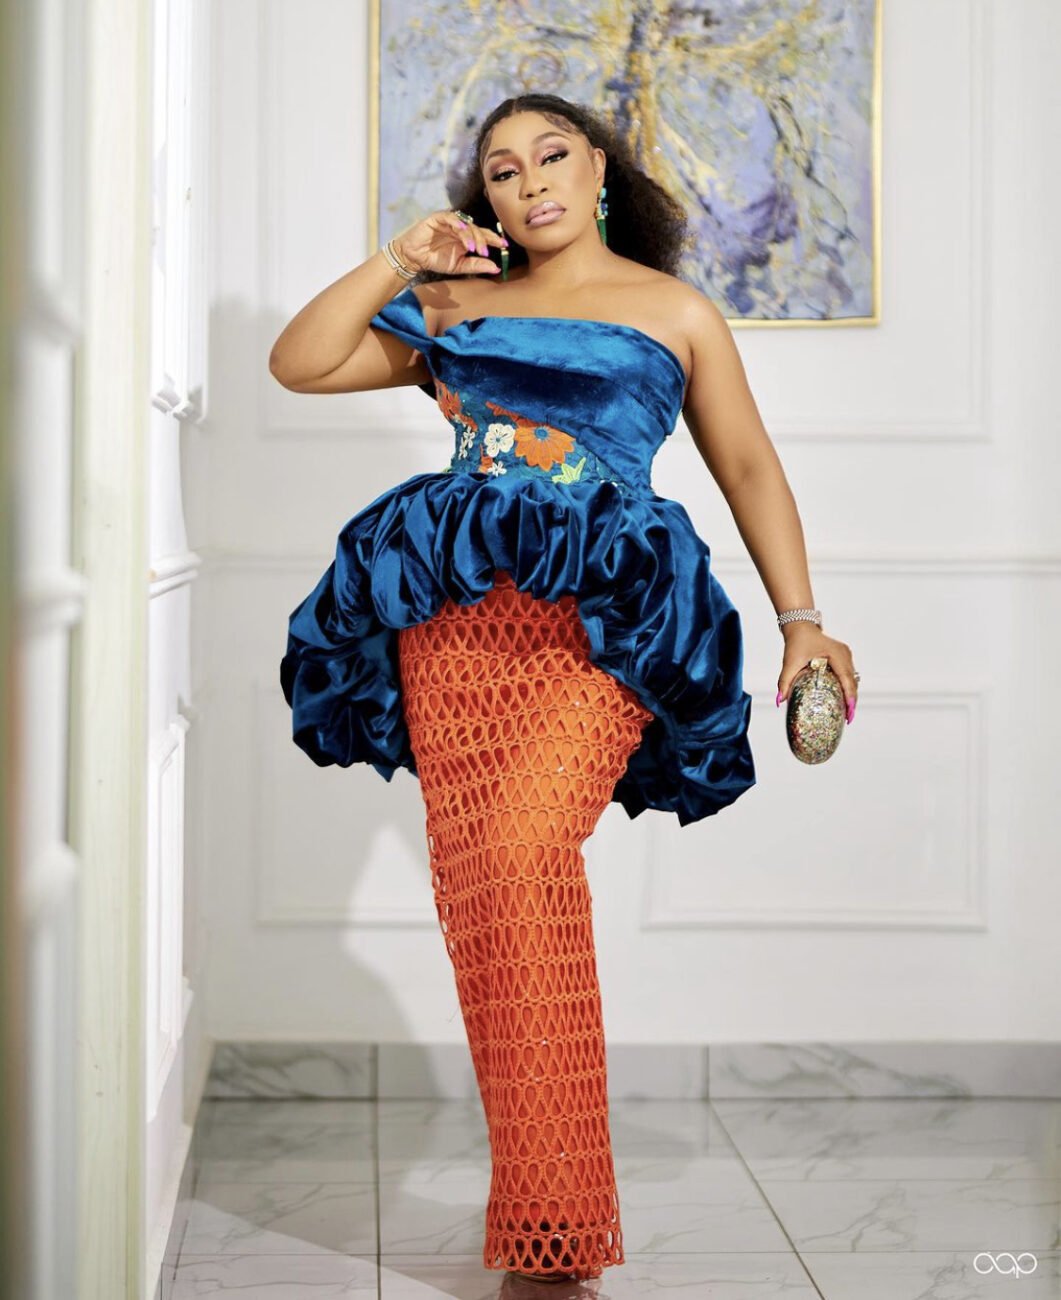 Rita Dominic in a blue suede top and orange lace skirt, showcasing fashion brilliance.